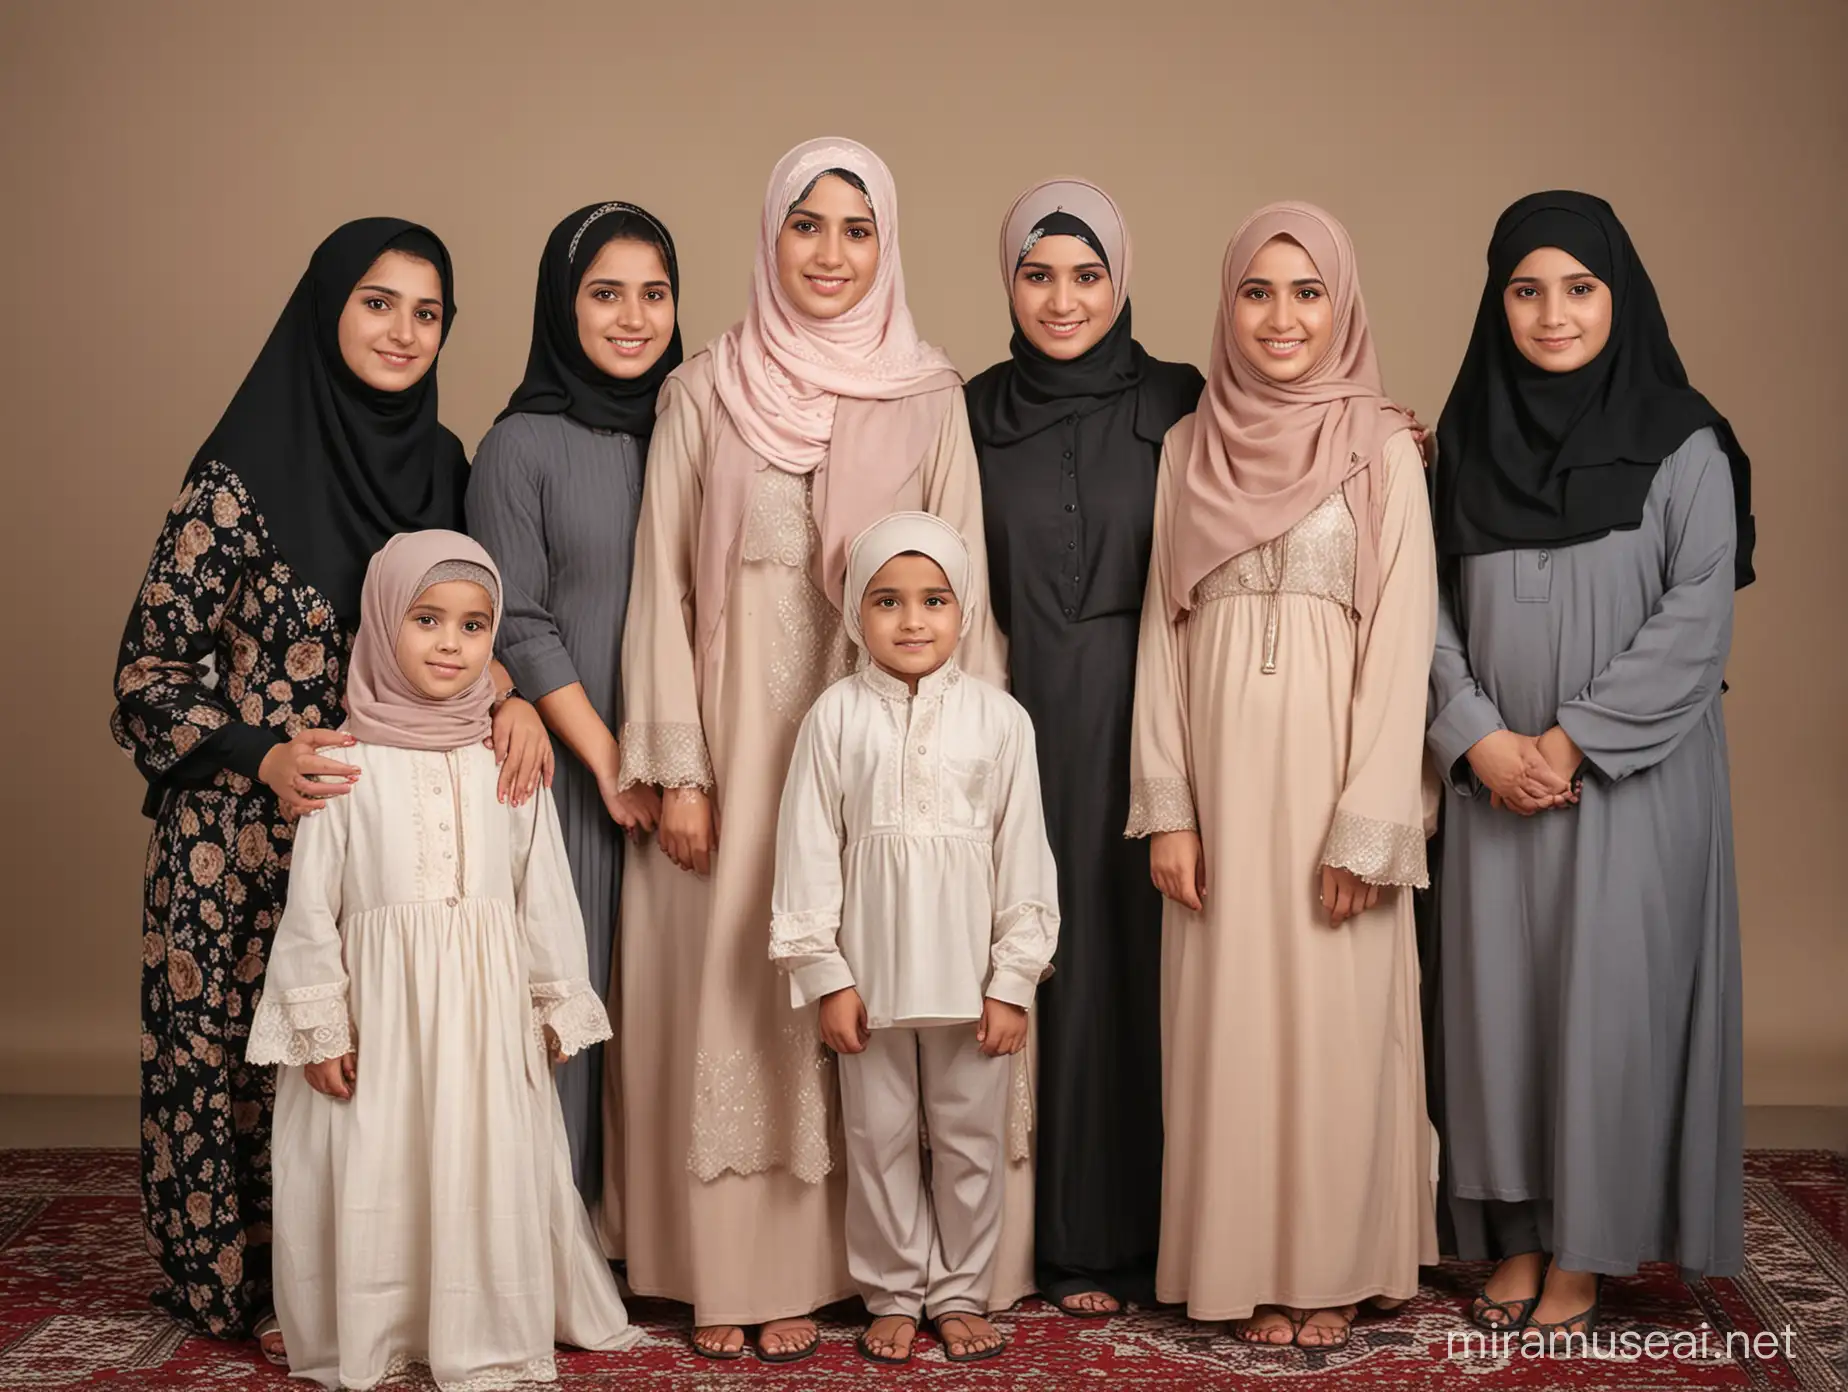 Muslim Family Portrait with Three Brothers Two Sisters and Parents